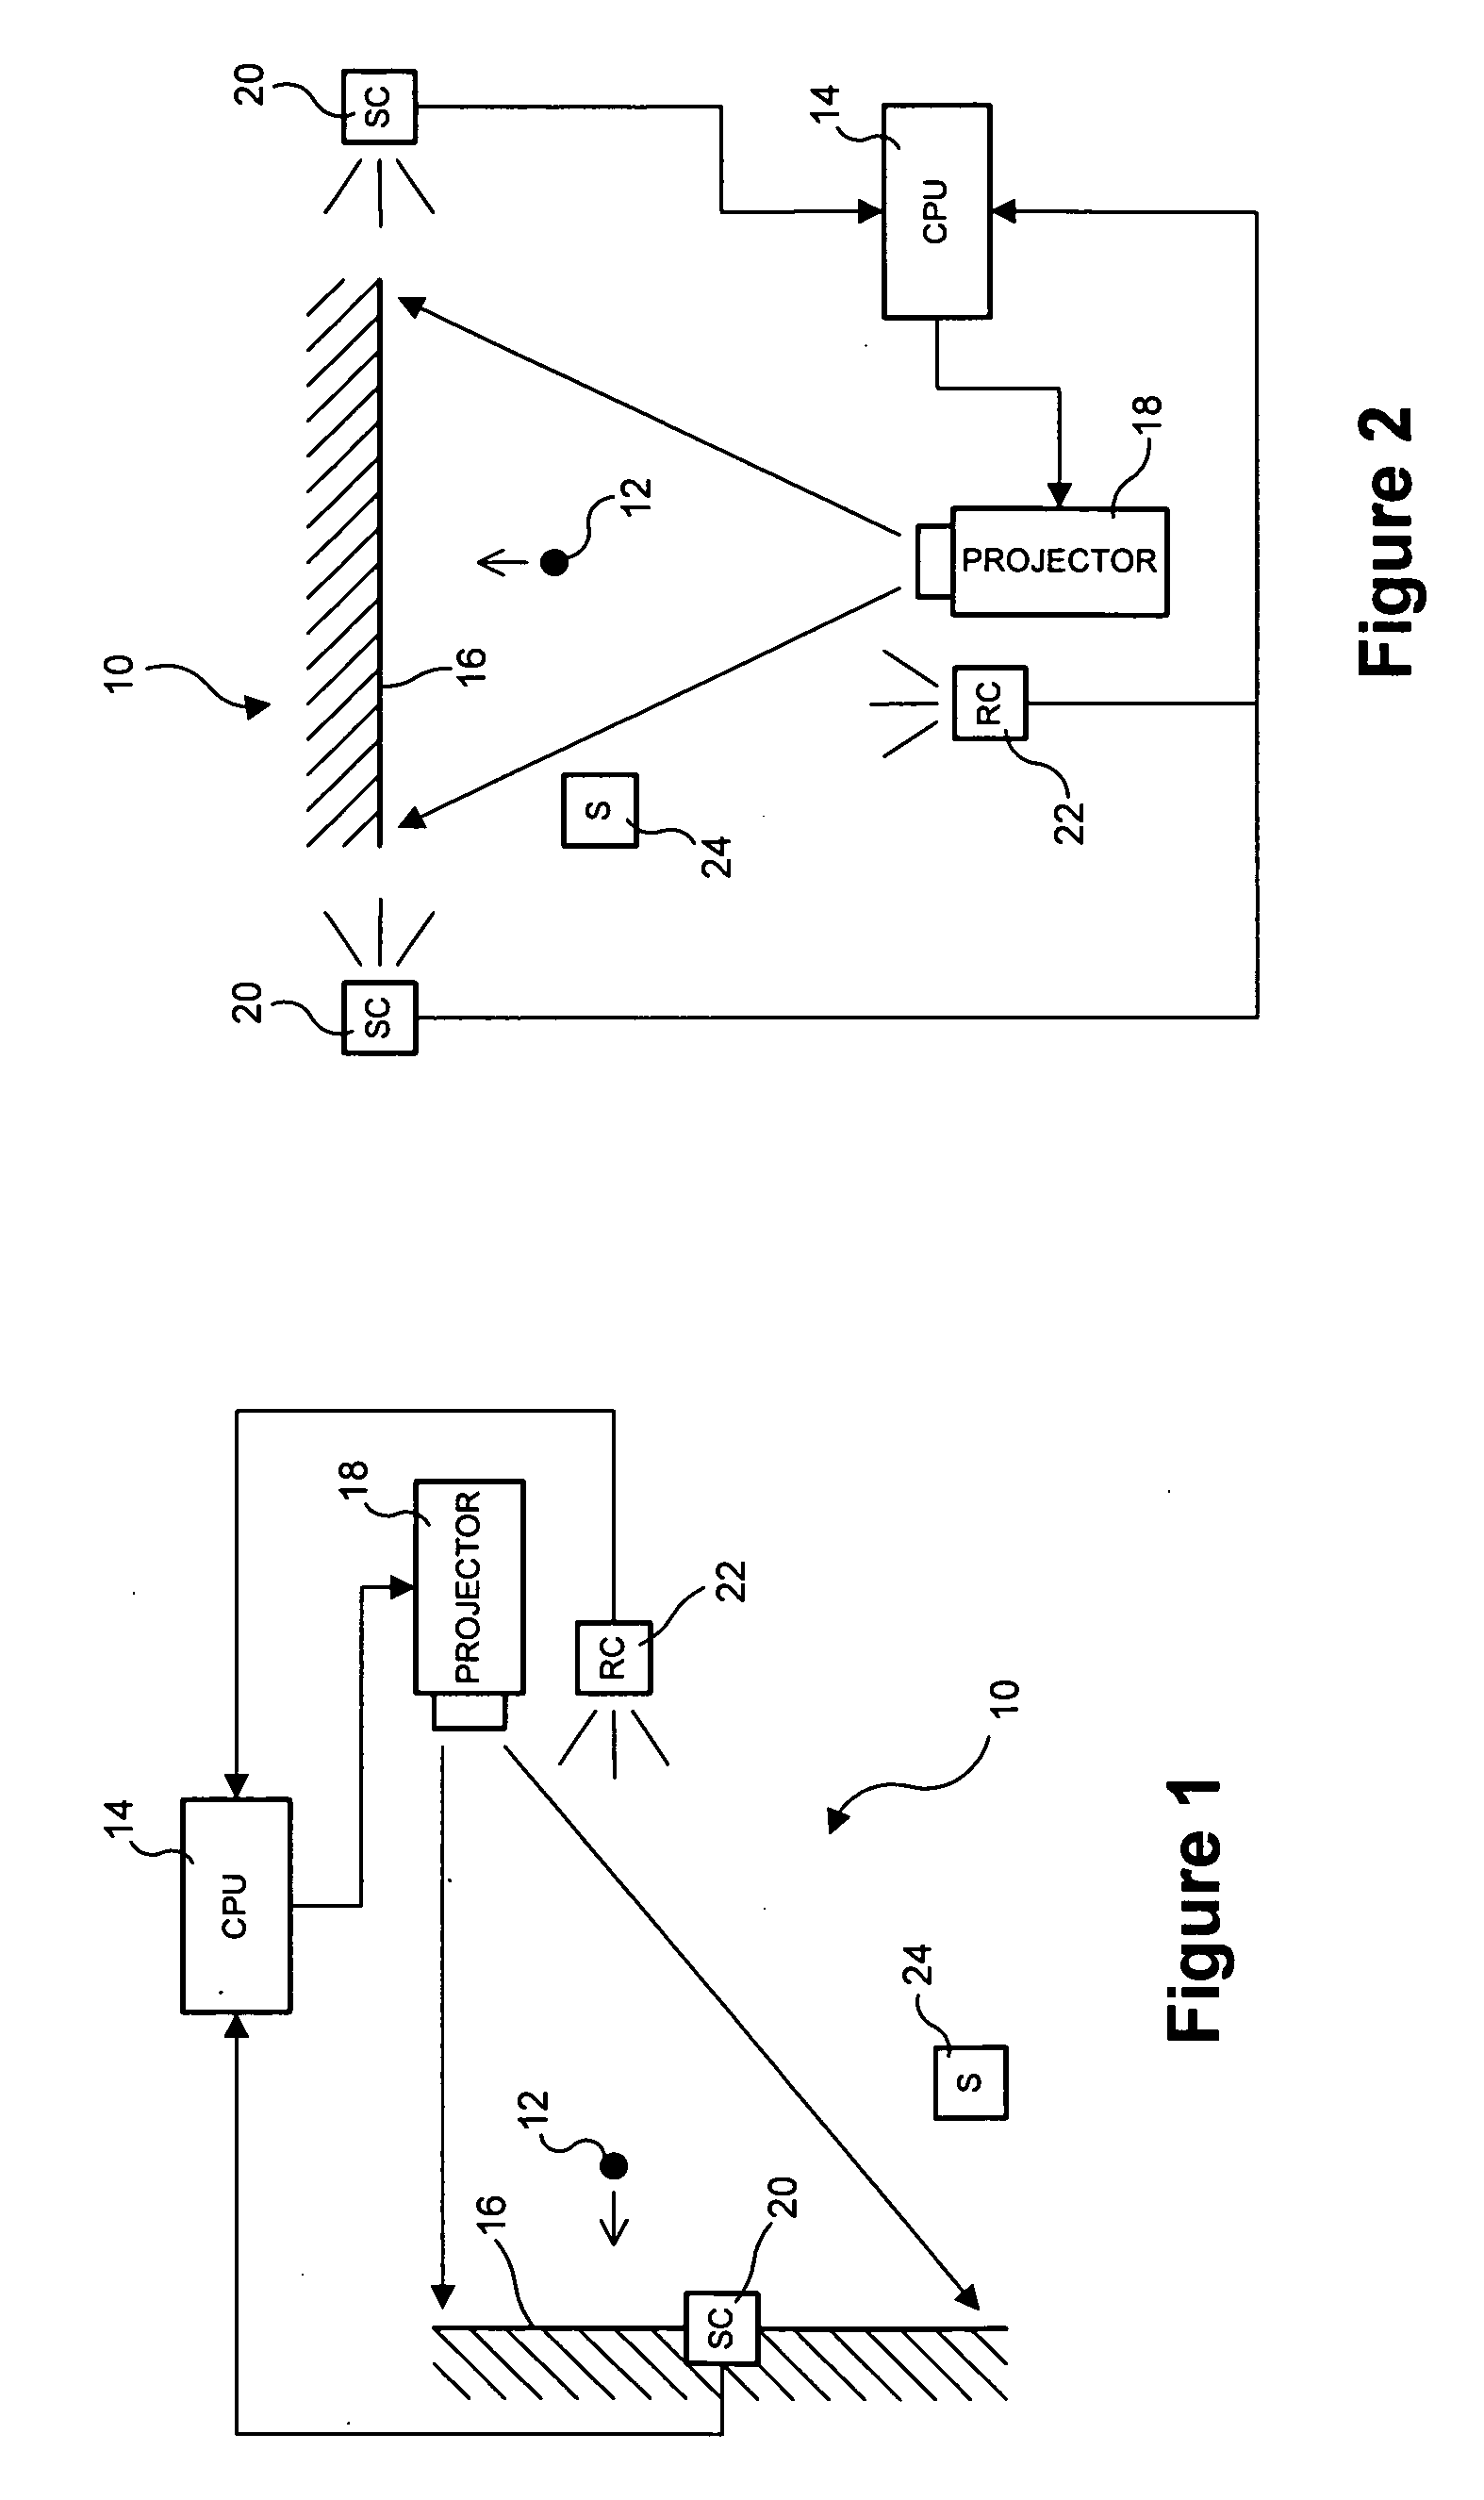 System for promoting physical activity employing impact position sensing and response